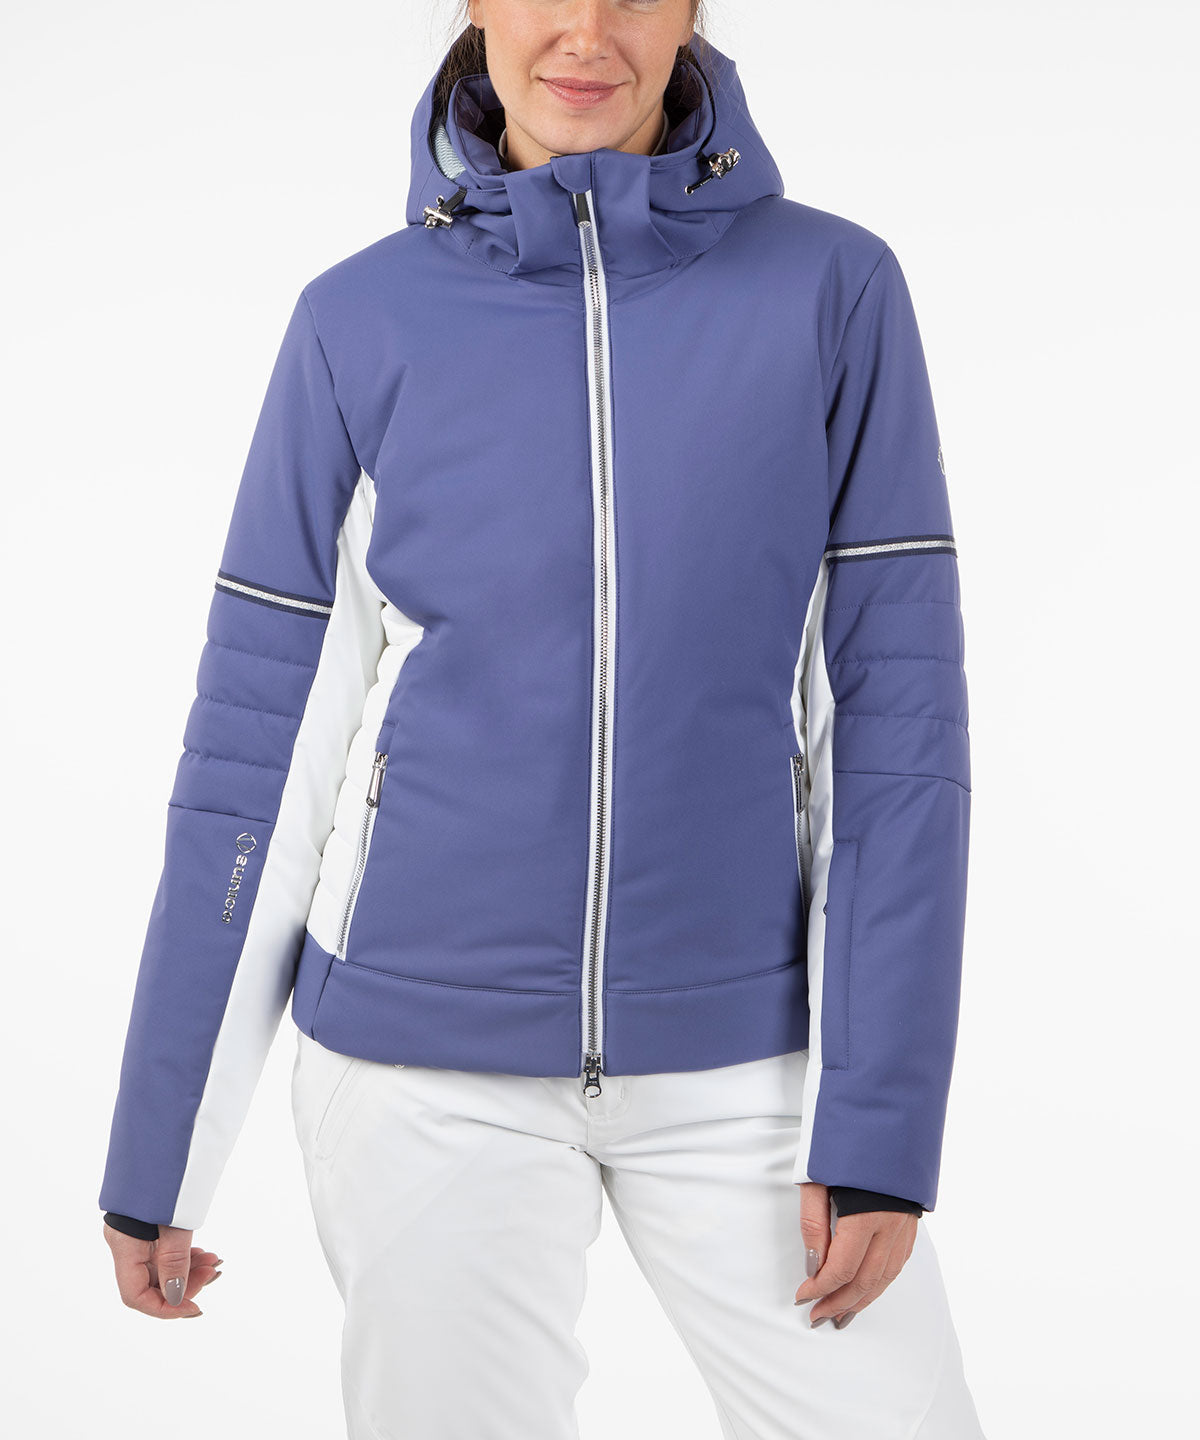 Women's Melissa Waterproof Stretch Jacket with Removable Hood